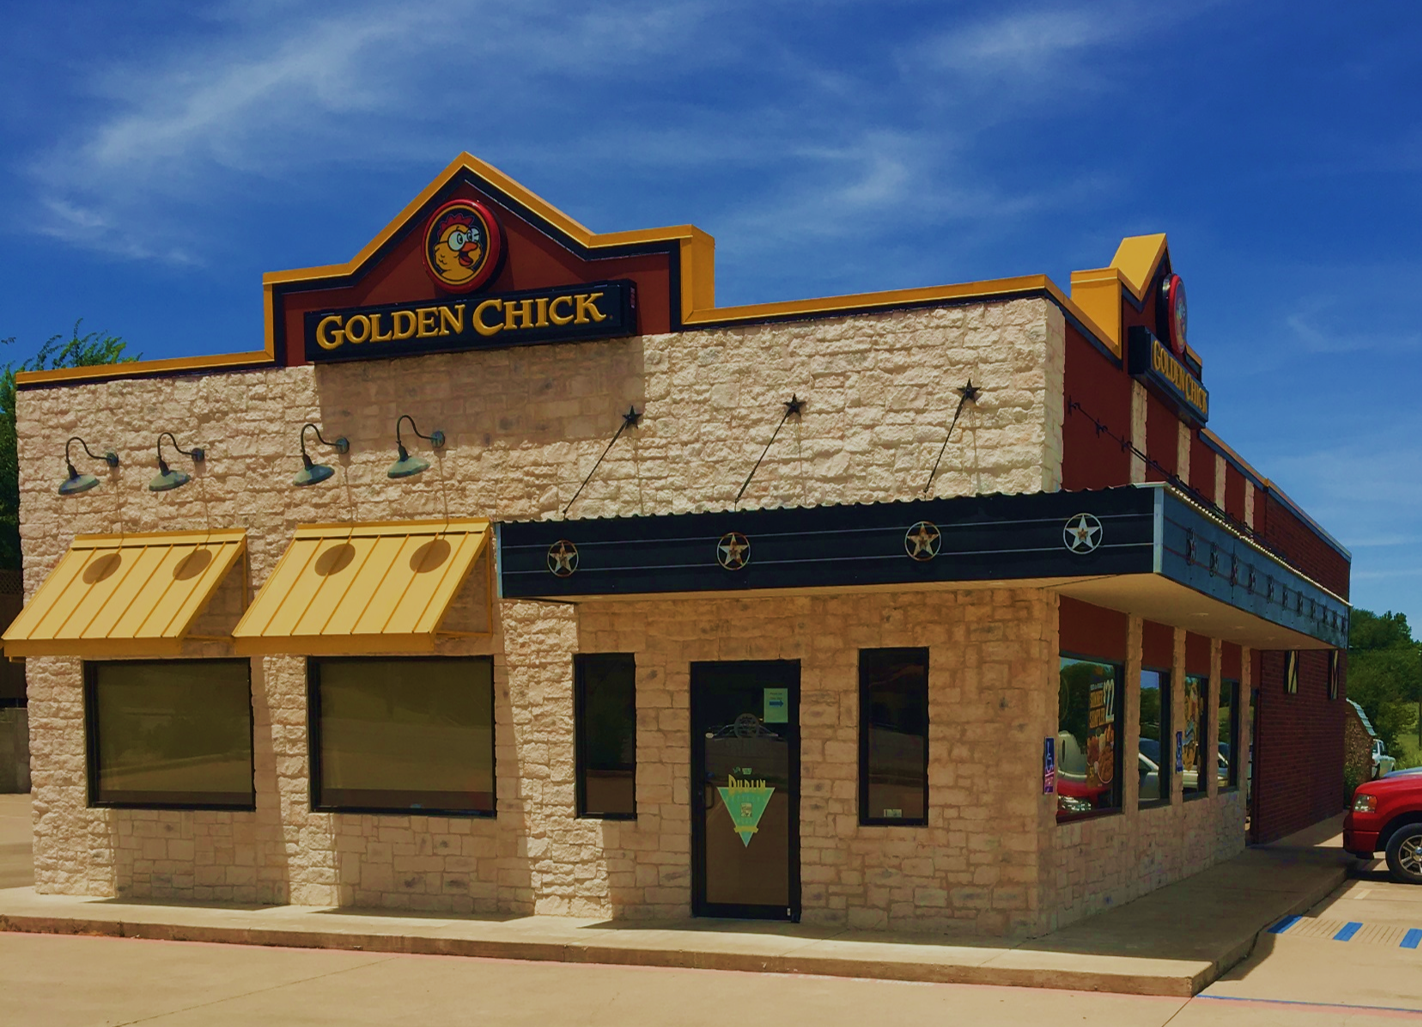 Golden Chick storefront.  Your local Golden Chick fast food restaurant in Dublin, Texas